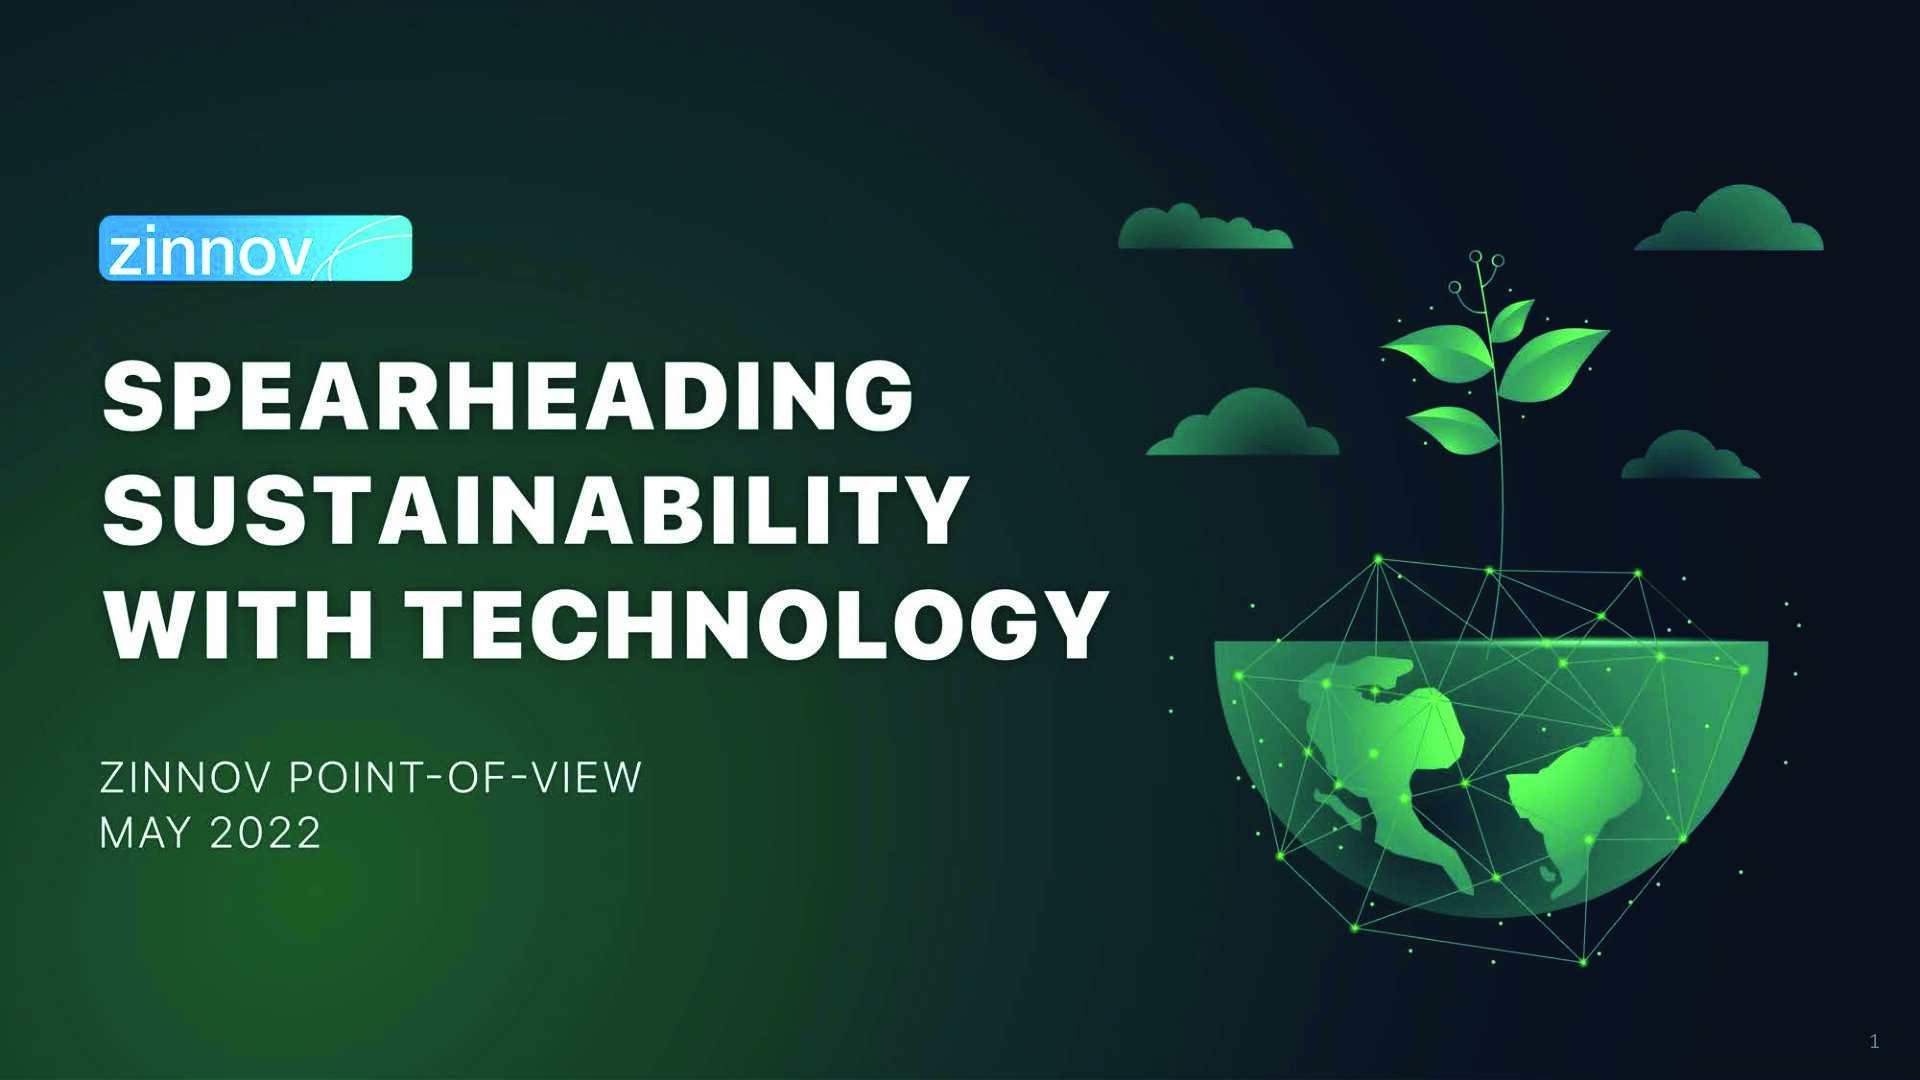 Zinnov Spearheading Sustainability With Technology1